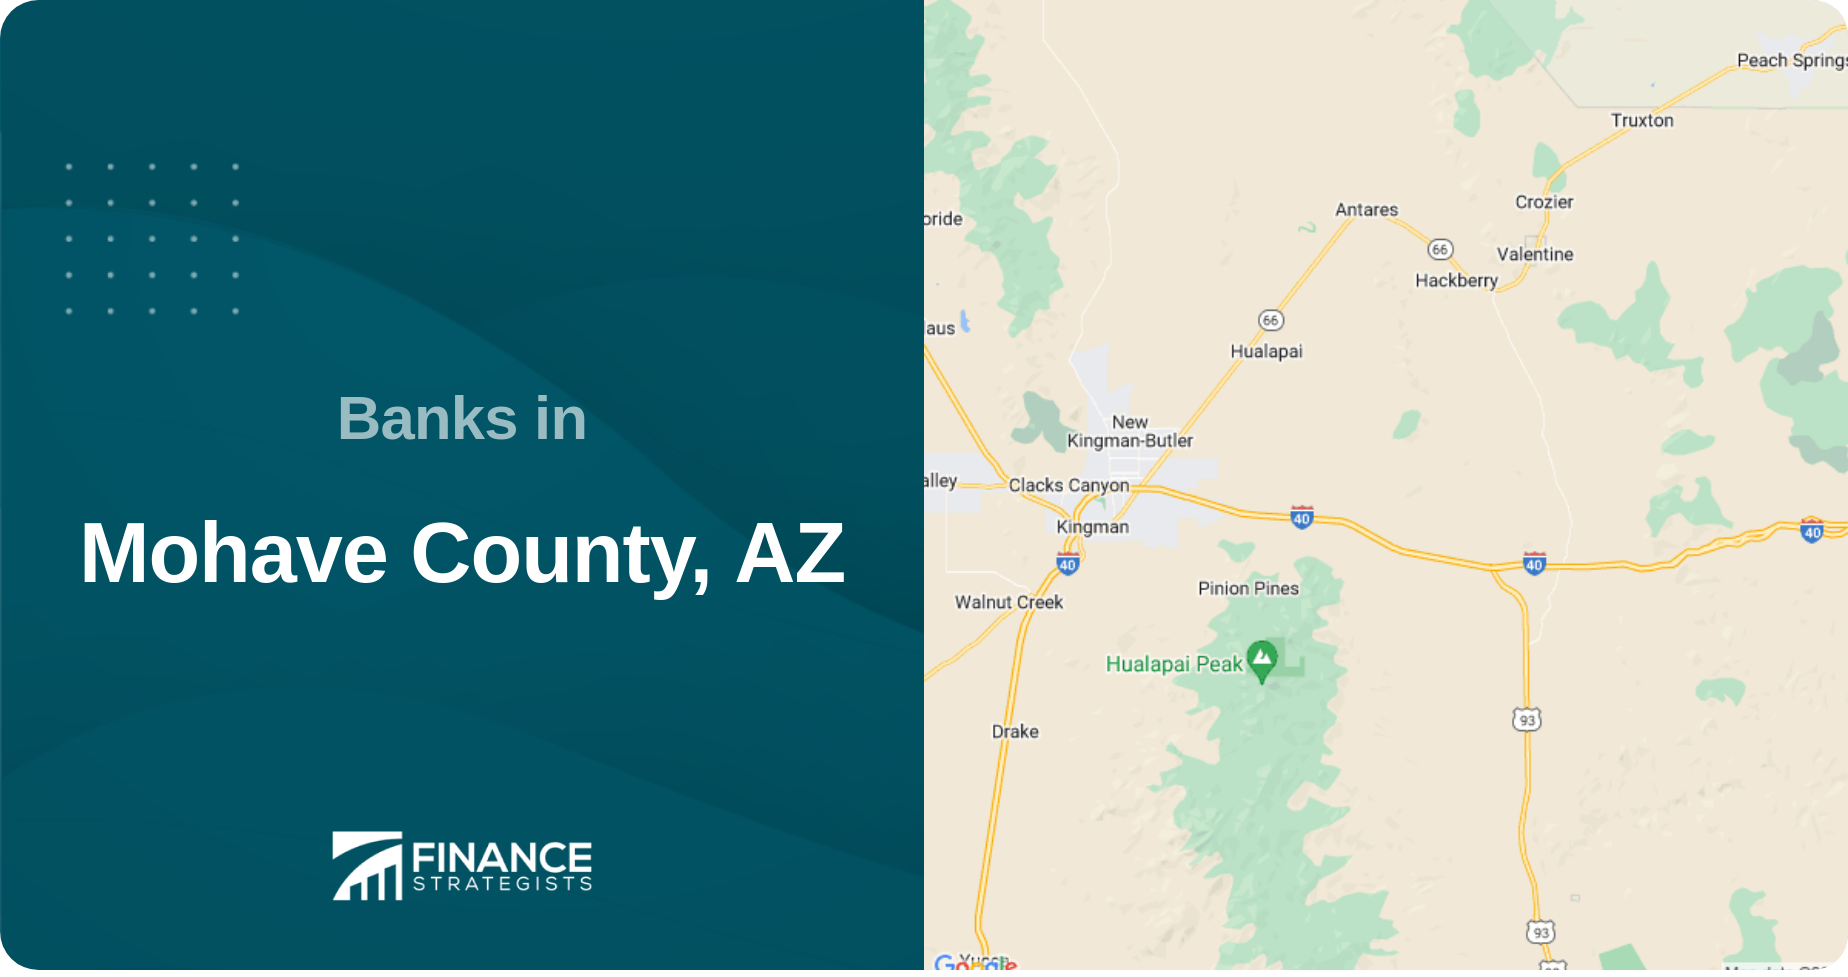 Banks in Mohave County, AZ